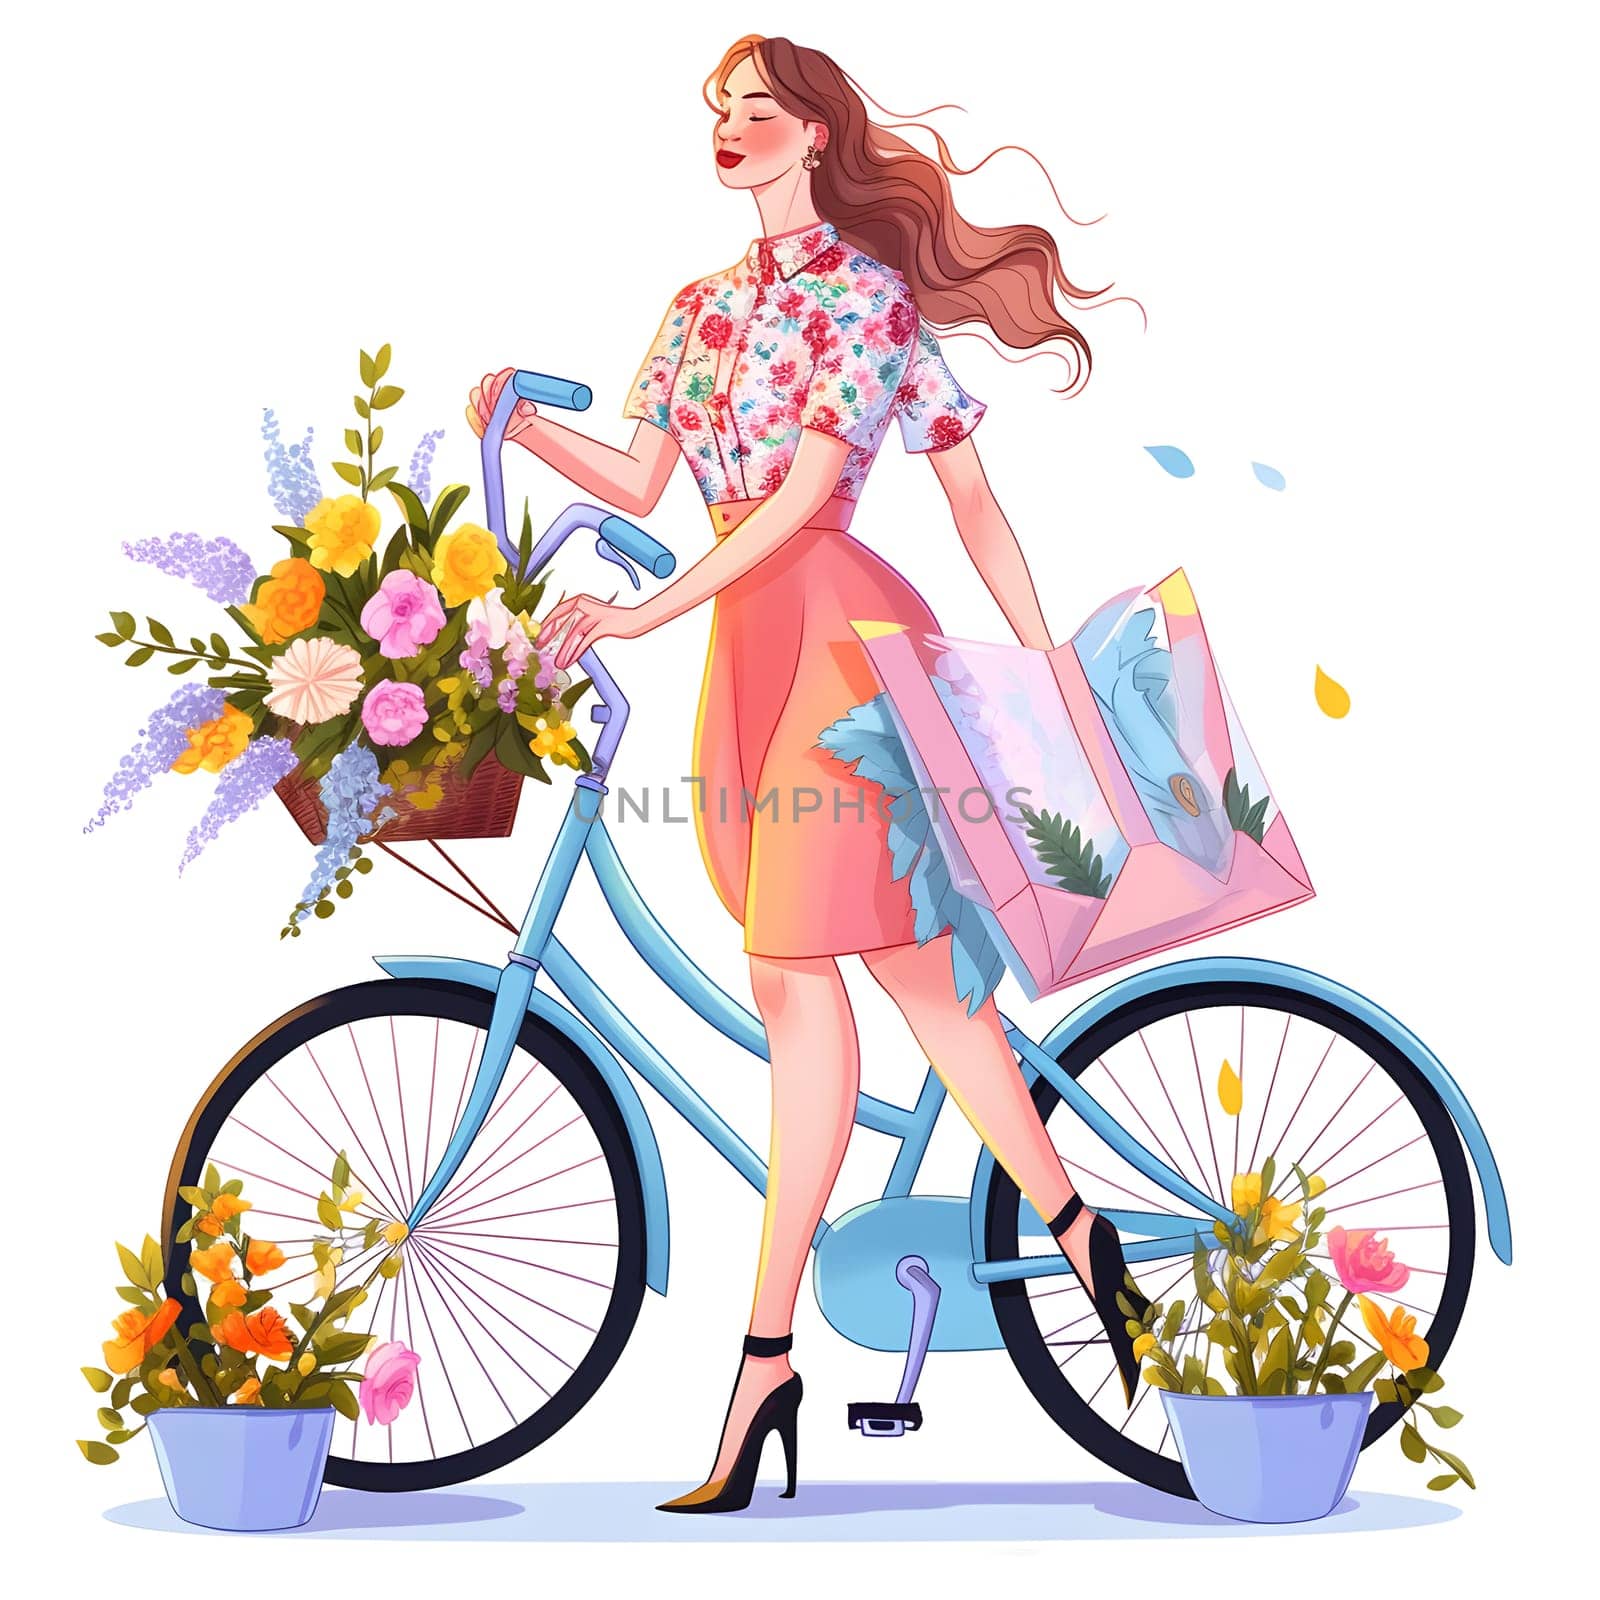 A woman is standing next to a bicycle with a plant in the basket, dressed elegantly with the bicycle wheel, tire, frame, and handlebar in view